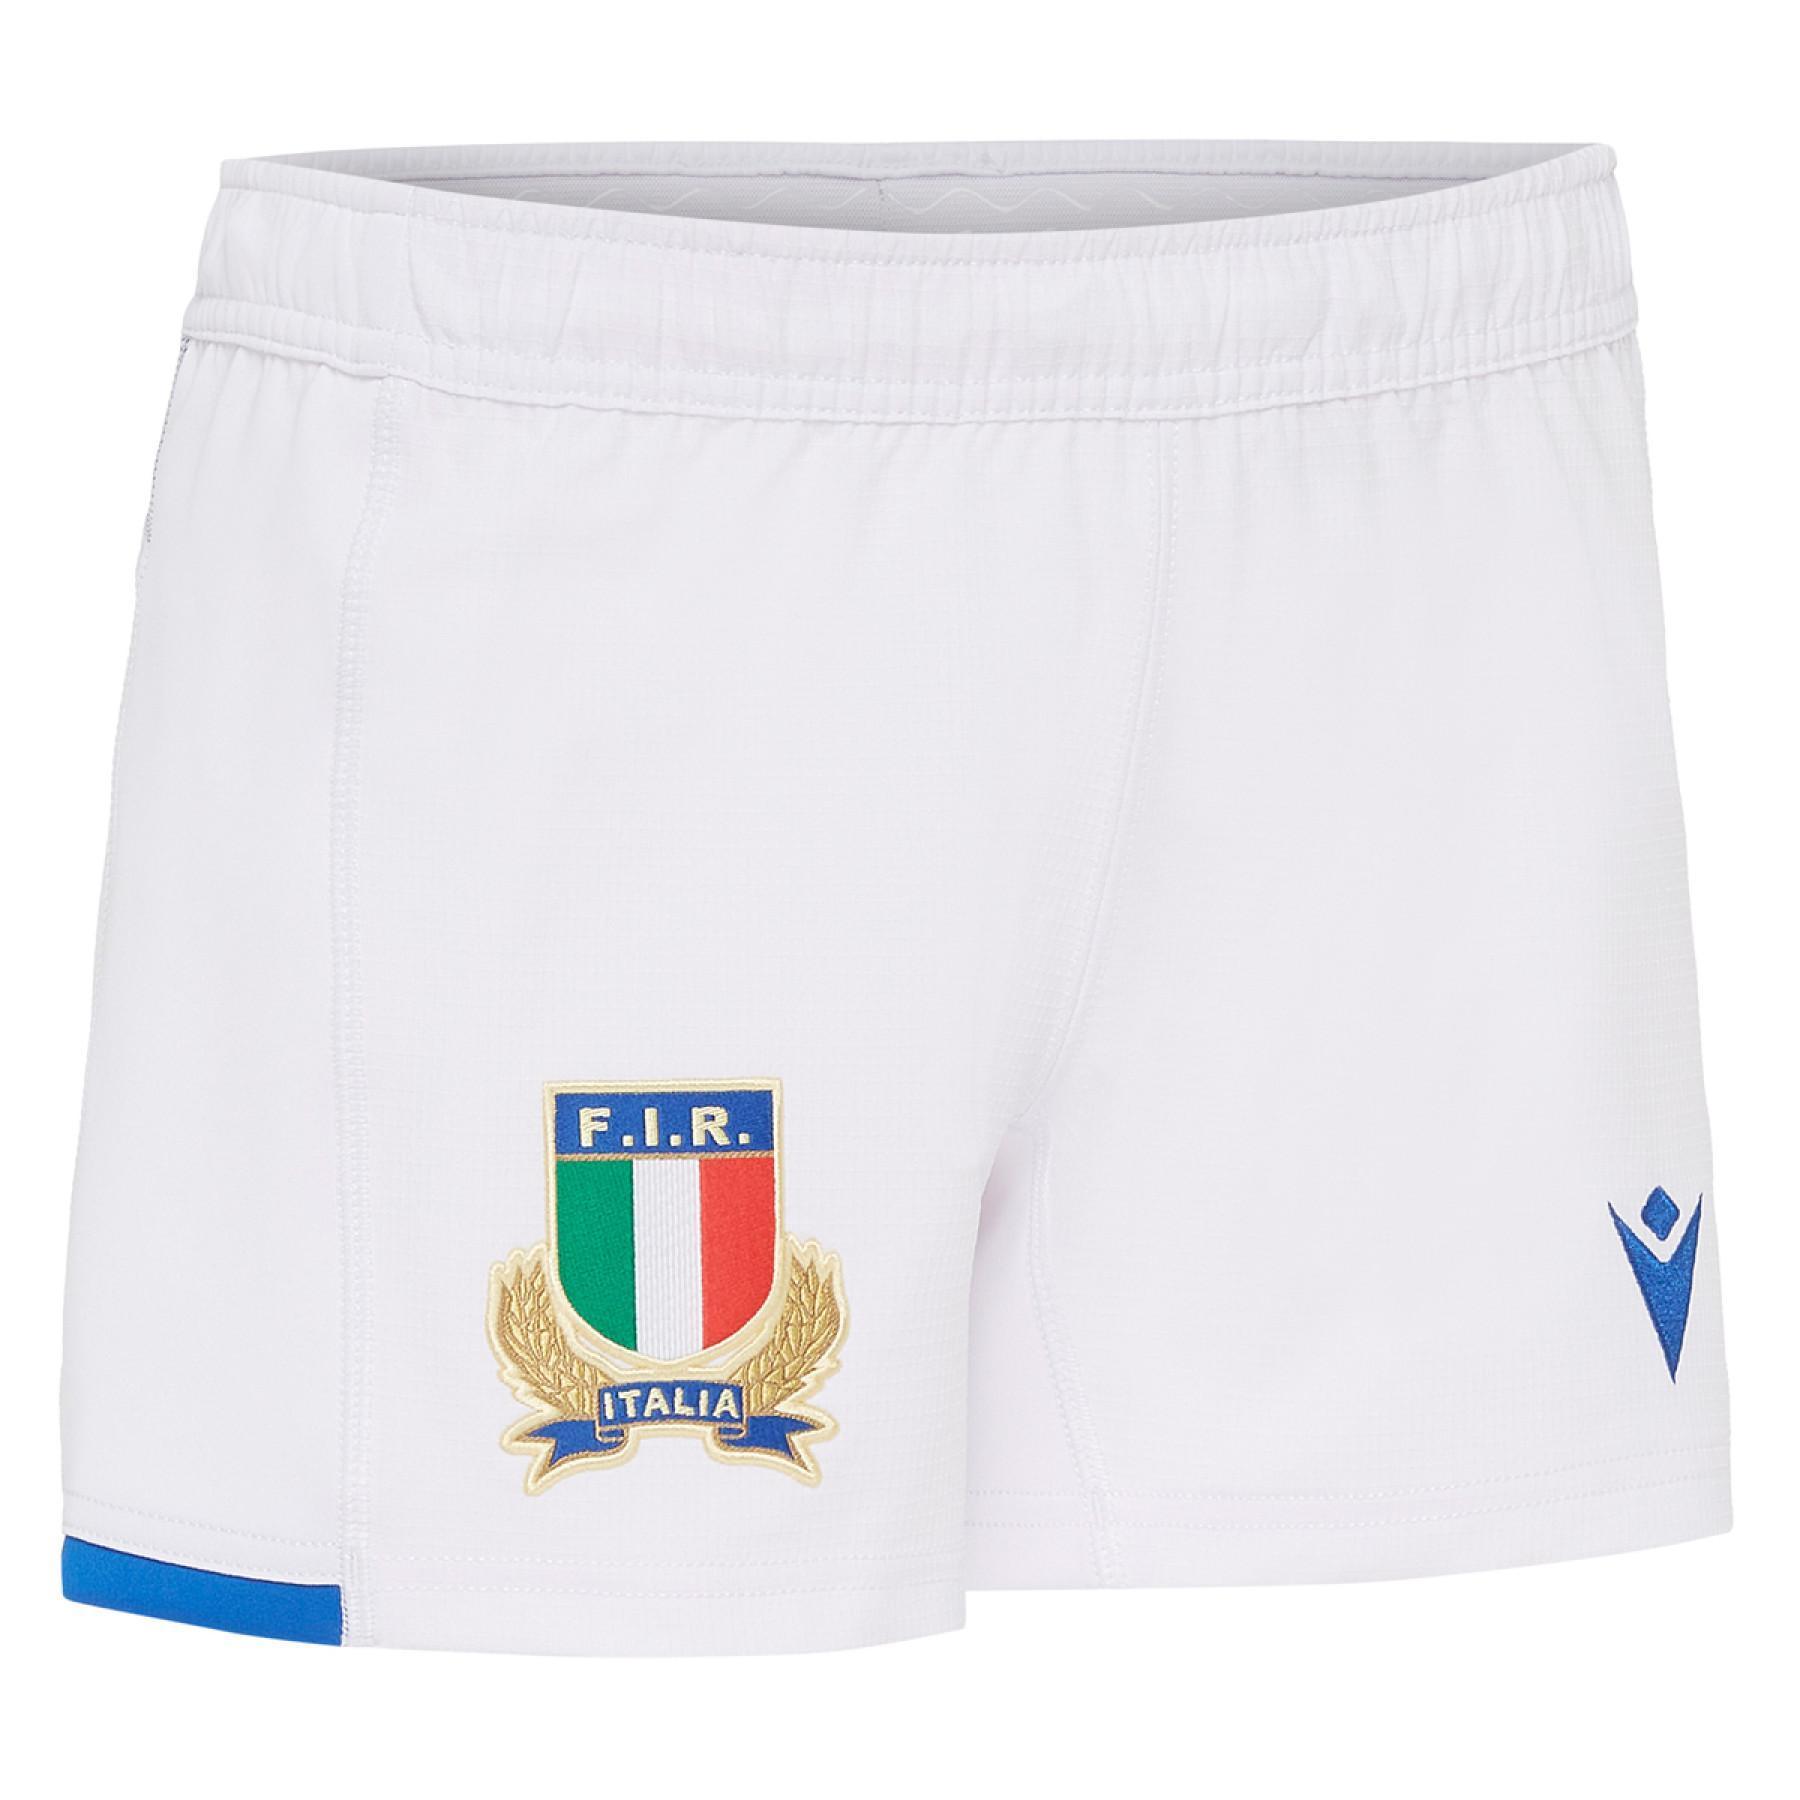 Short child home Italien rugby 2020/21